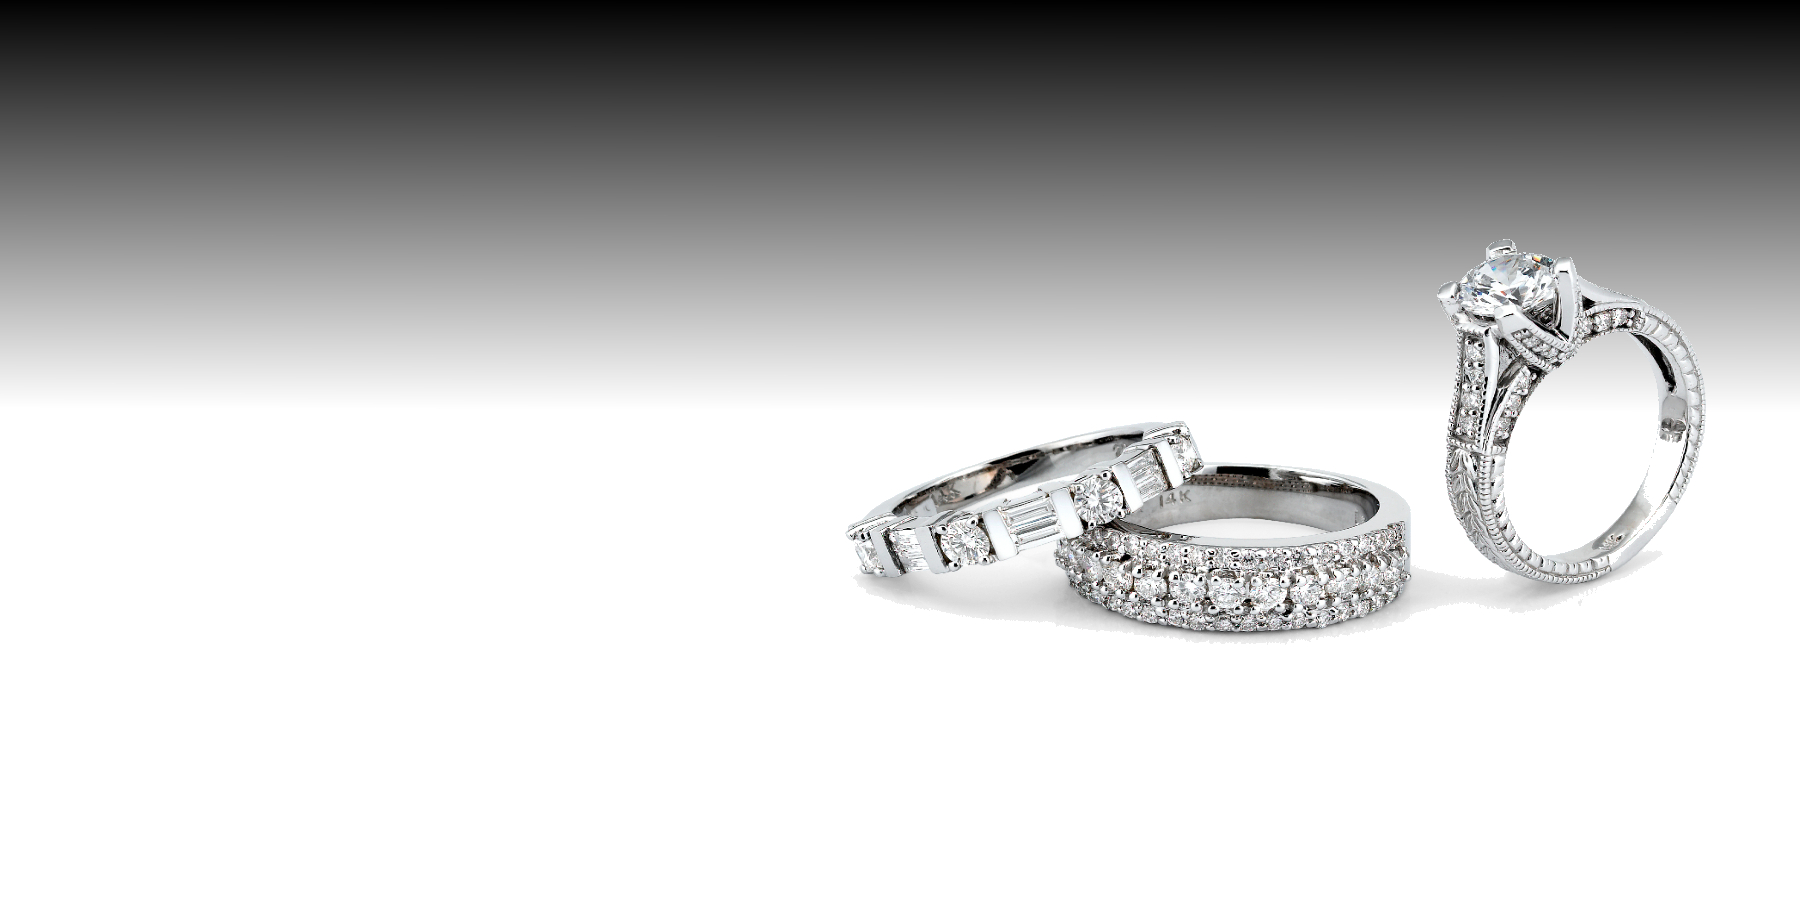 Design the Perfect Engagement Ring